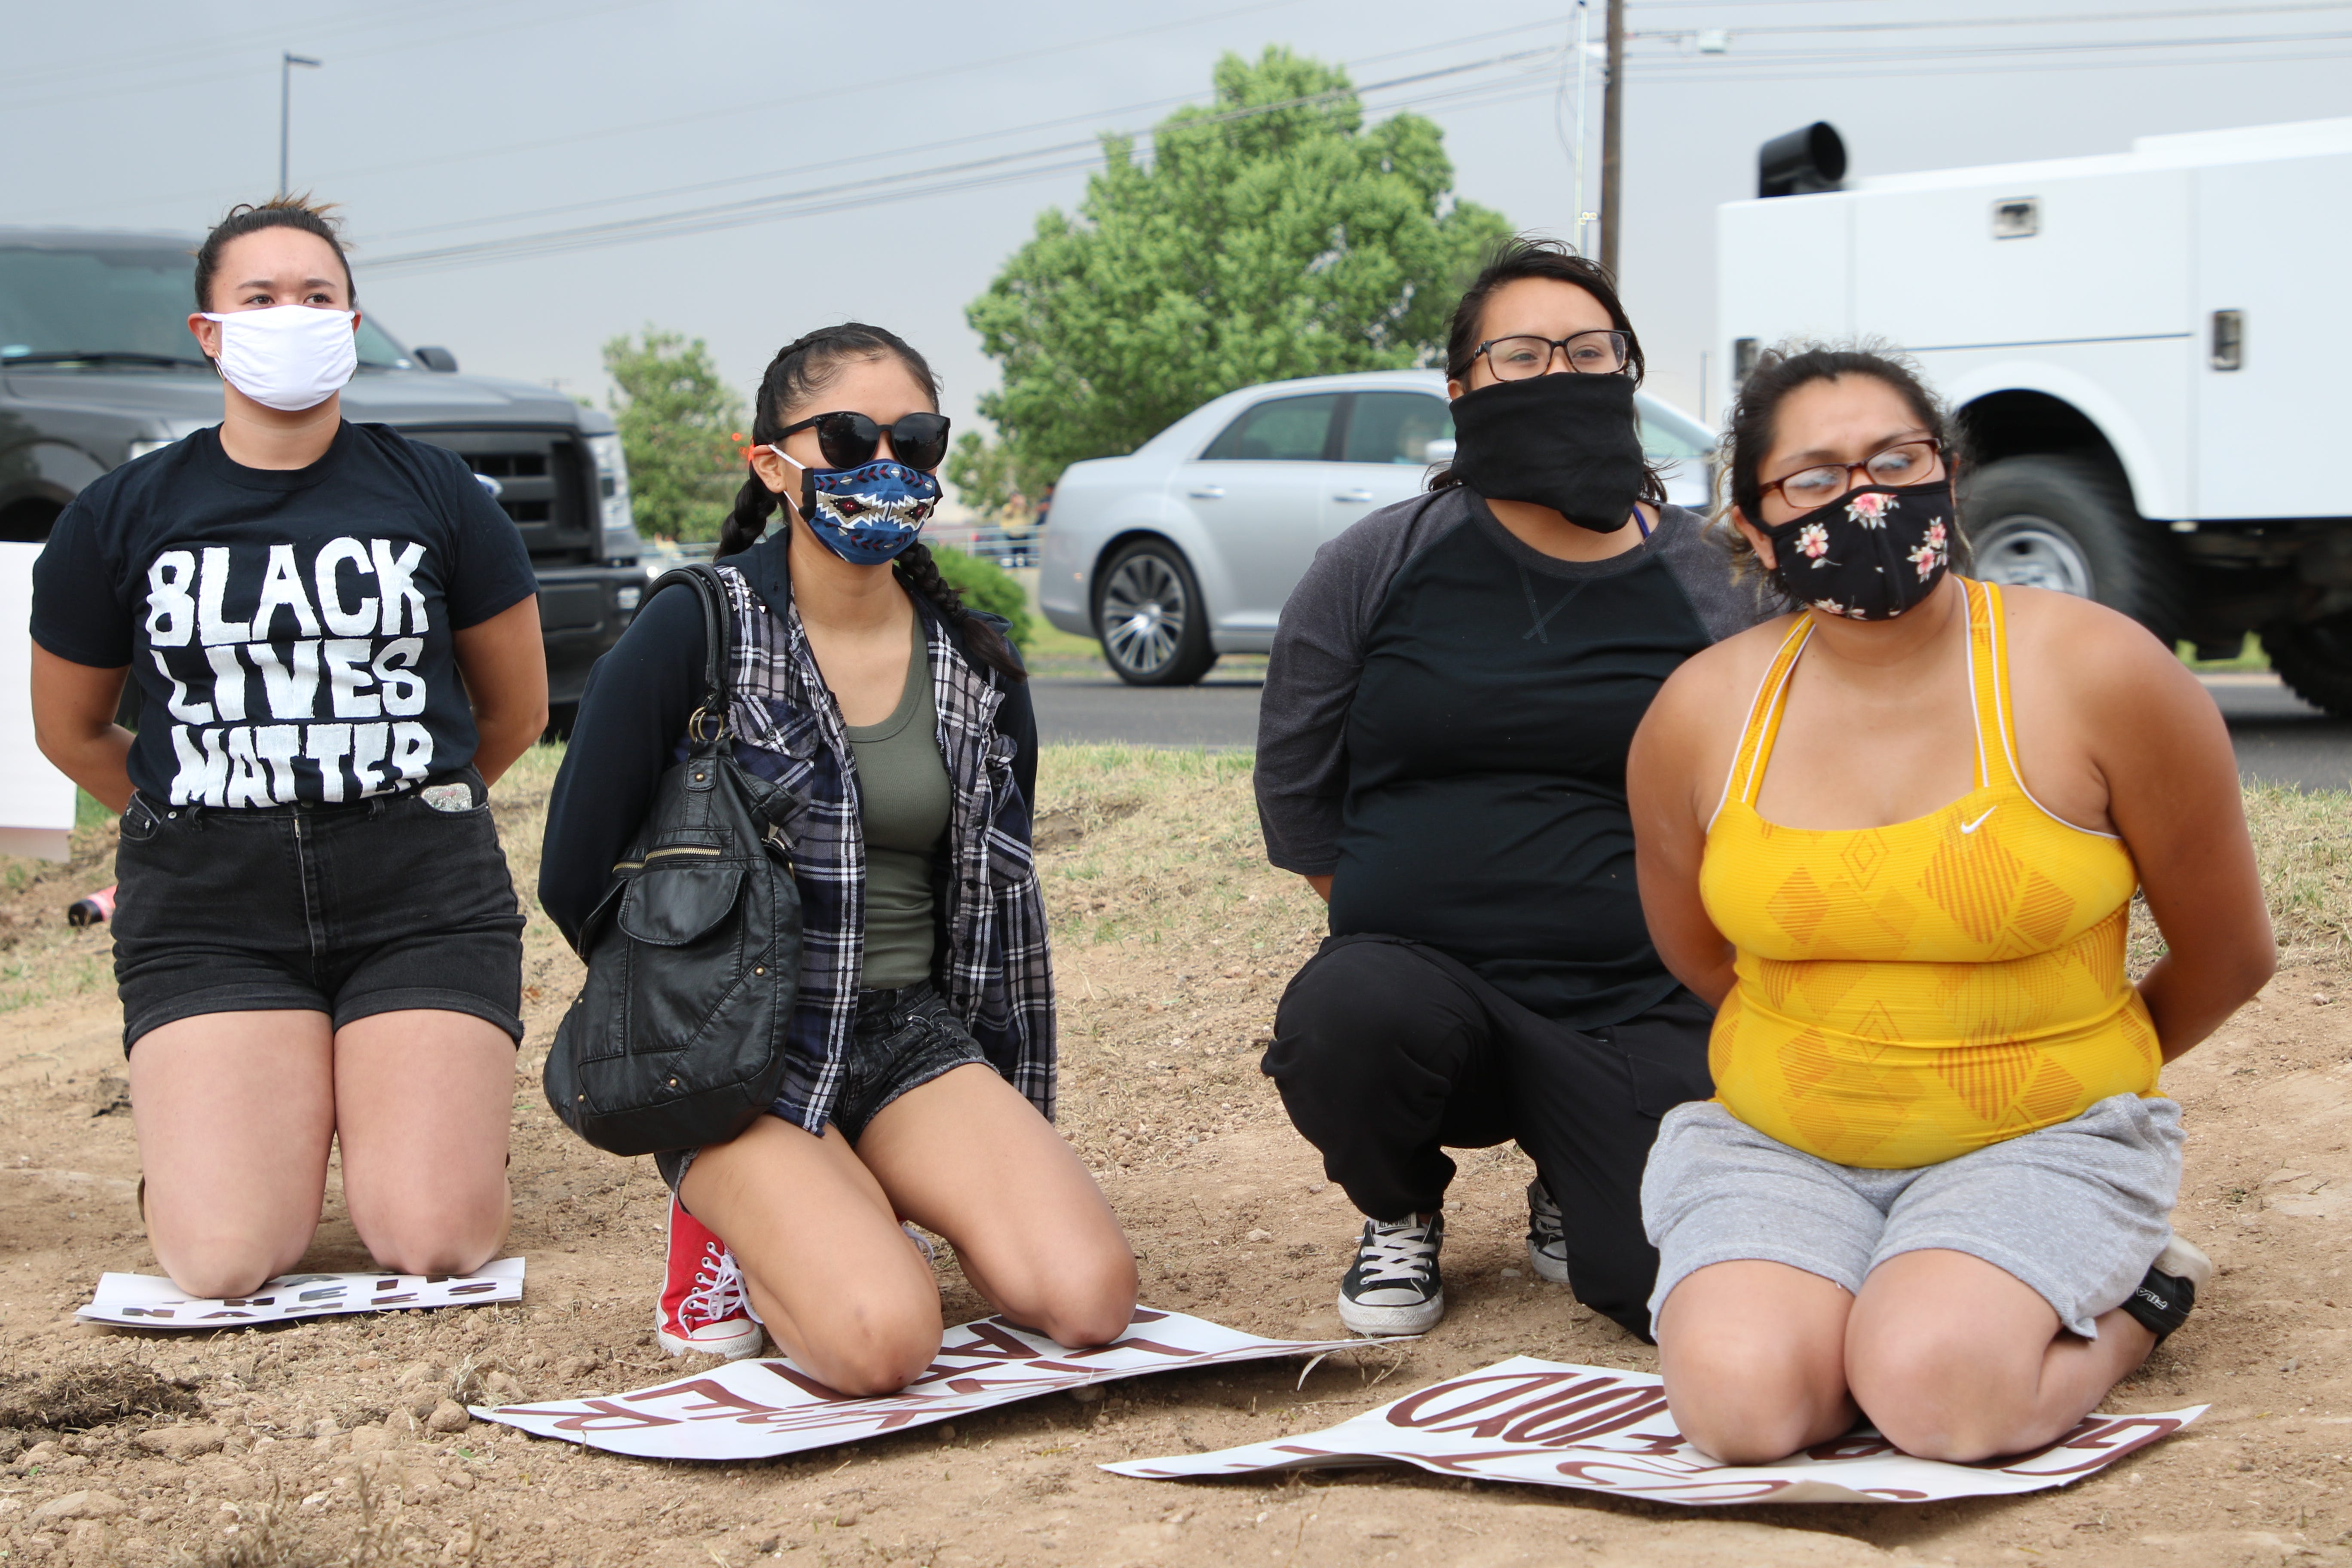 Participants take a knee in solidarity at a protest on June 1 near the Animas Valley Mall in Farmington that called for justice in George Floyd's death in Minneapolis.